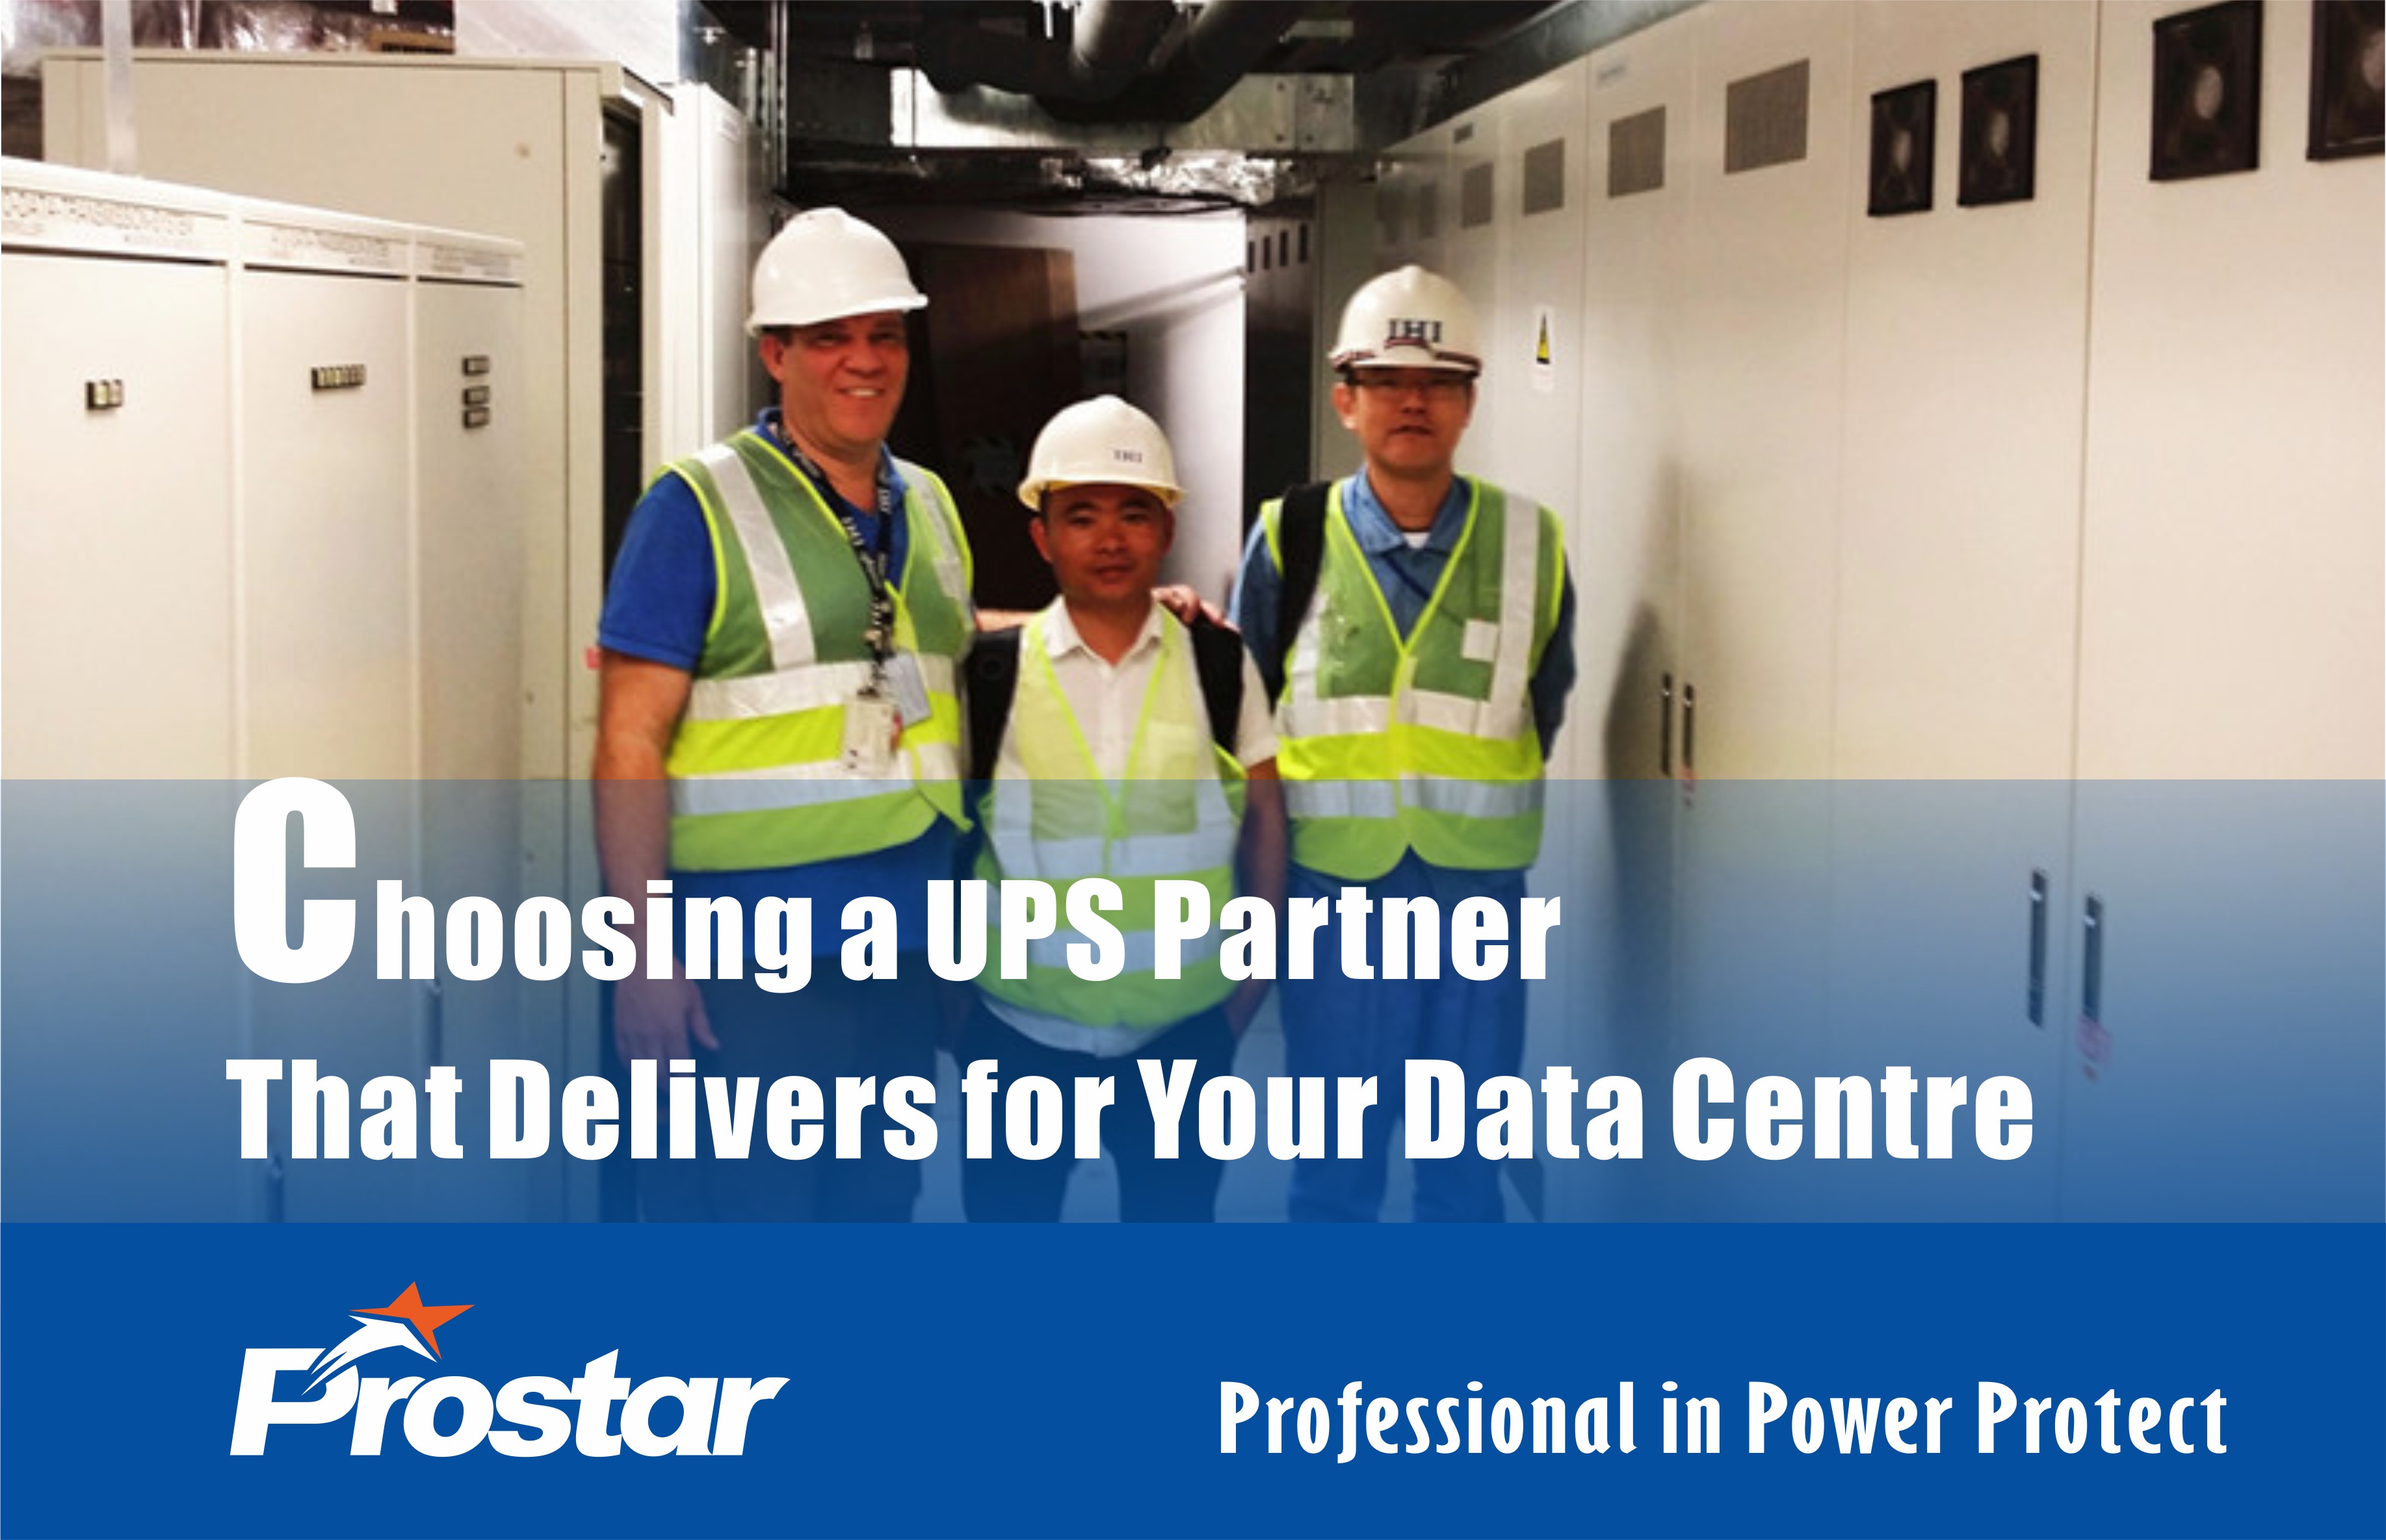 Choosing a UPS Partner That Delivers for Your Data Centre